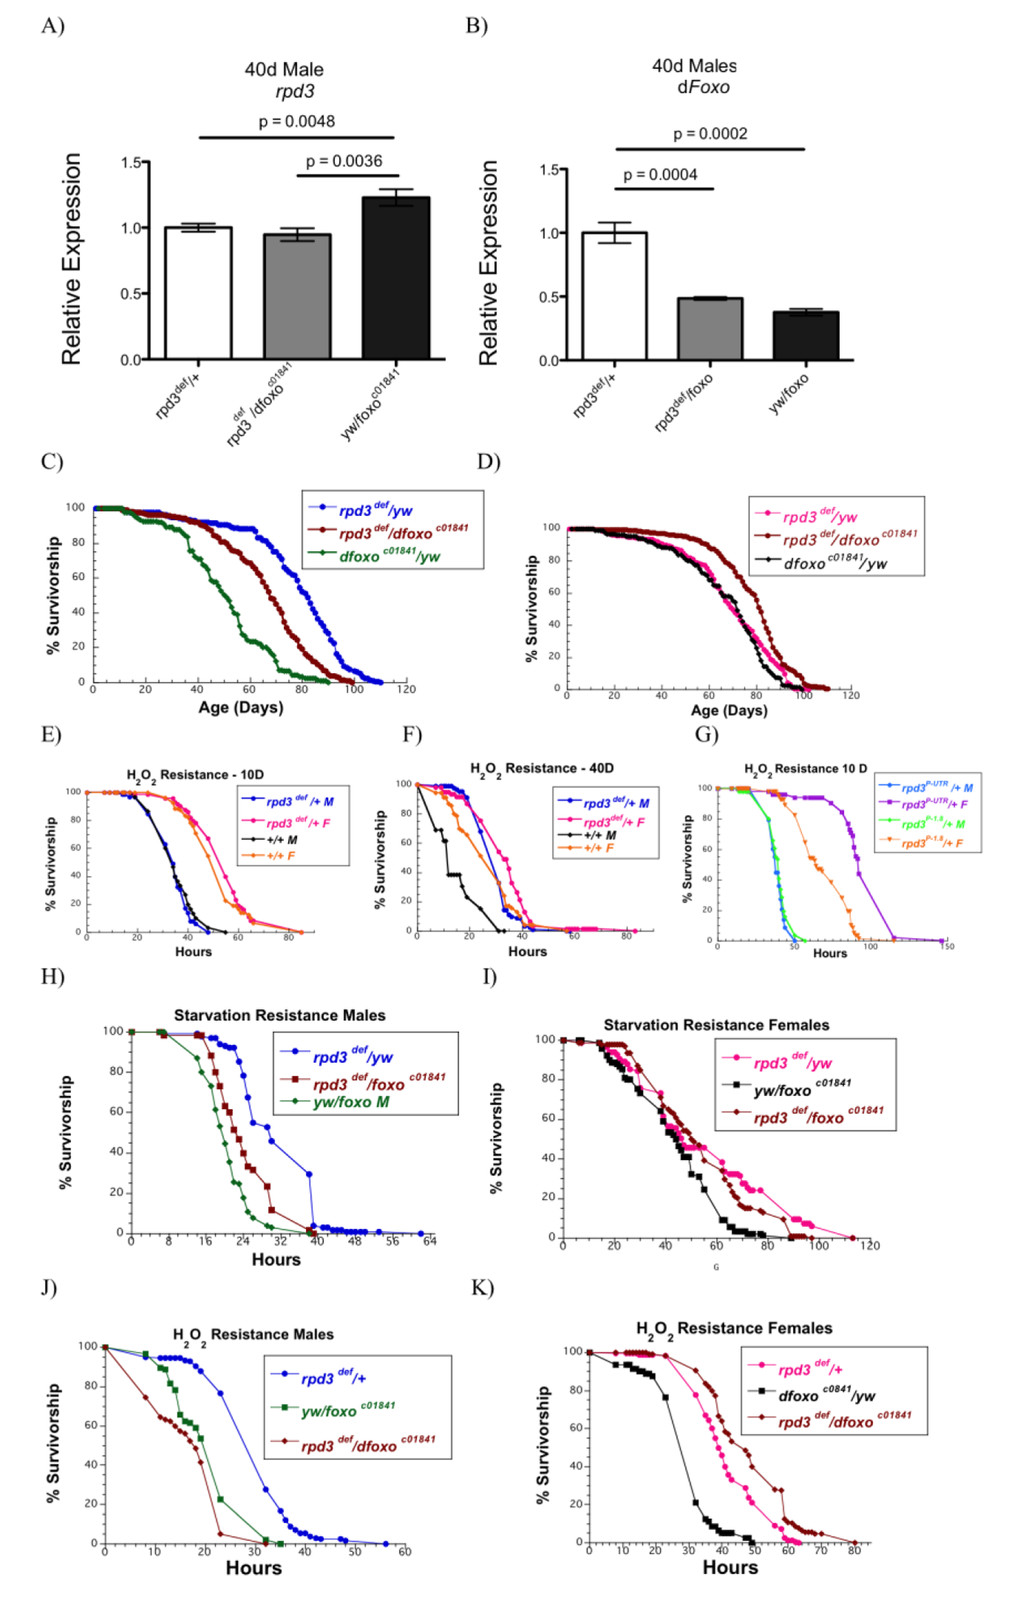 dfoxo partially mediates effects on longevity and stress resistance observed in male rpd3 mutant flies. (A, B) rpd3 (A) and dfoxo (B) mRNA levels in the heads and thoraces of rpd3def/yw, rpd3def/dfoxoc01841and dfoxoc01841/yw male flies at 40 days determined by qPCR (n=3, 30 Heads and thoraces per replicate. p as noted, t test, error bars represent SEM). (C,D) Survival curves of male (C) and female (D) rpd3def/yw, rpd3def/dfoxoc01841 and dfoxoc01841/yw flies. (E-F) Survival curves of rpd3def/+ and control flies male and female flies on 5% H2O2 at age 10 (E) and 40 (F) days. (G) Survival curves of rpd3P-UTR/+ and rpd3P-1.8/+ male and female flies exposed to 5% H2O2 at age 10 days of age. (H, K) Survival curves for male (H, J) and female (I, K) rpd3def/yw, rpd3def/dfoxoc01841 and dfoxoc01841/yw flies during starvation (H, I) or on 5% H2O2 (J, K) at age 40.